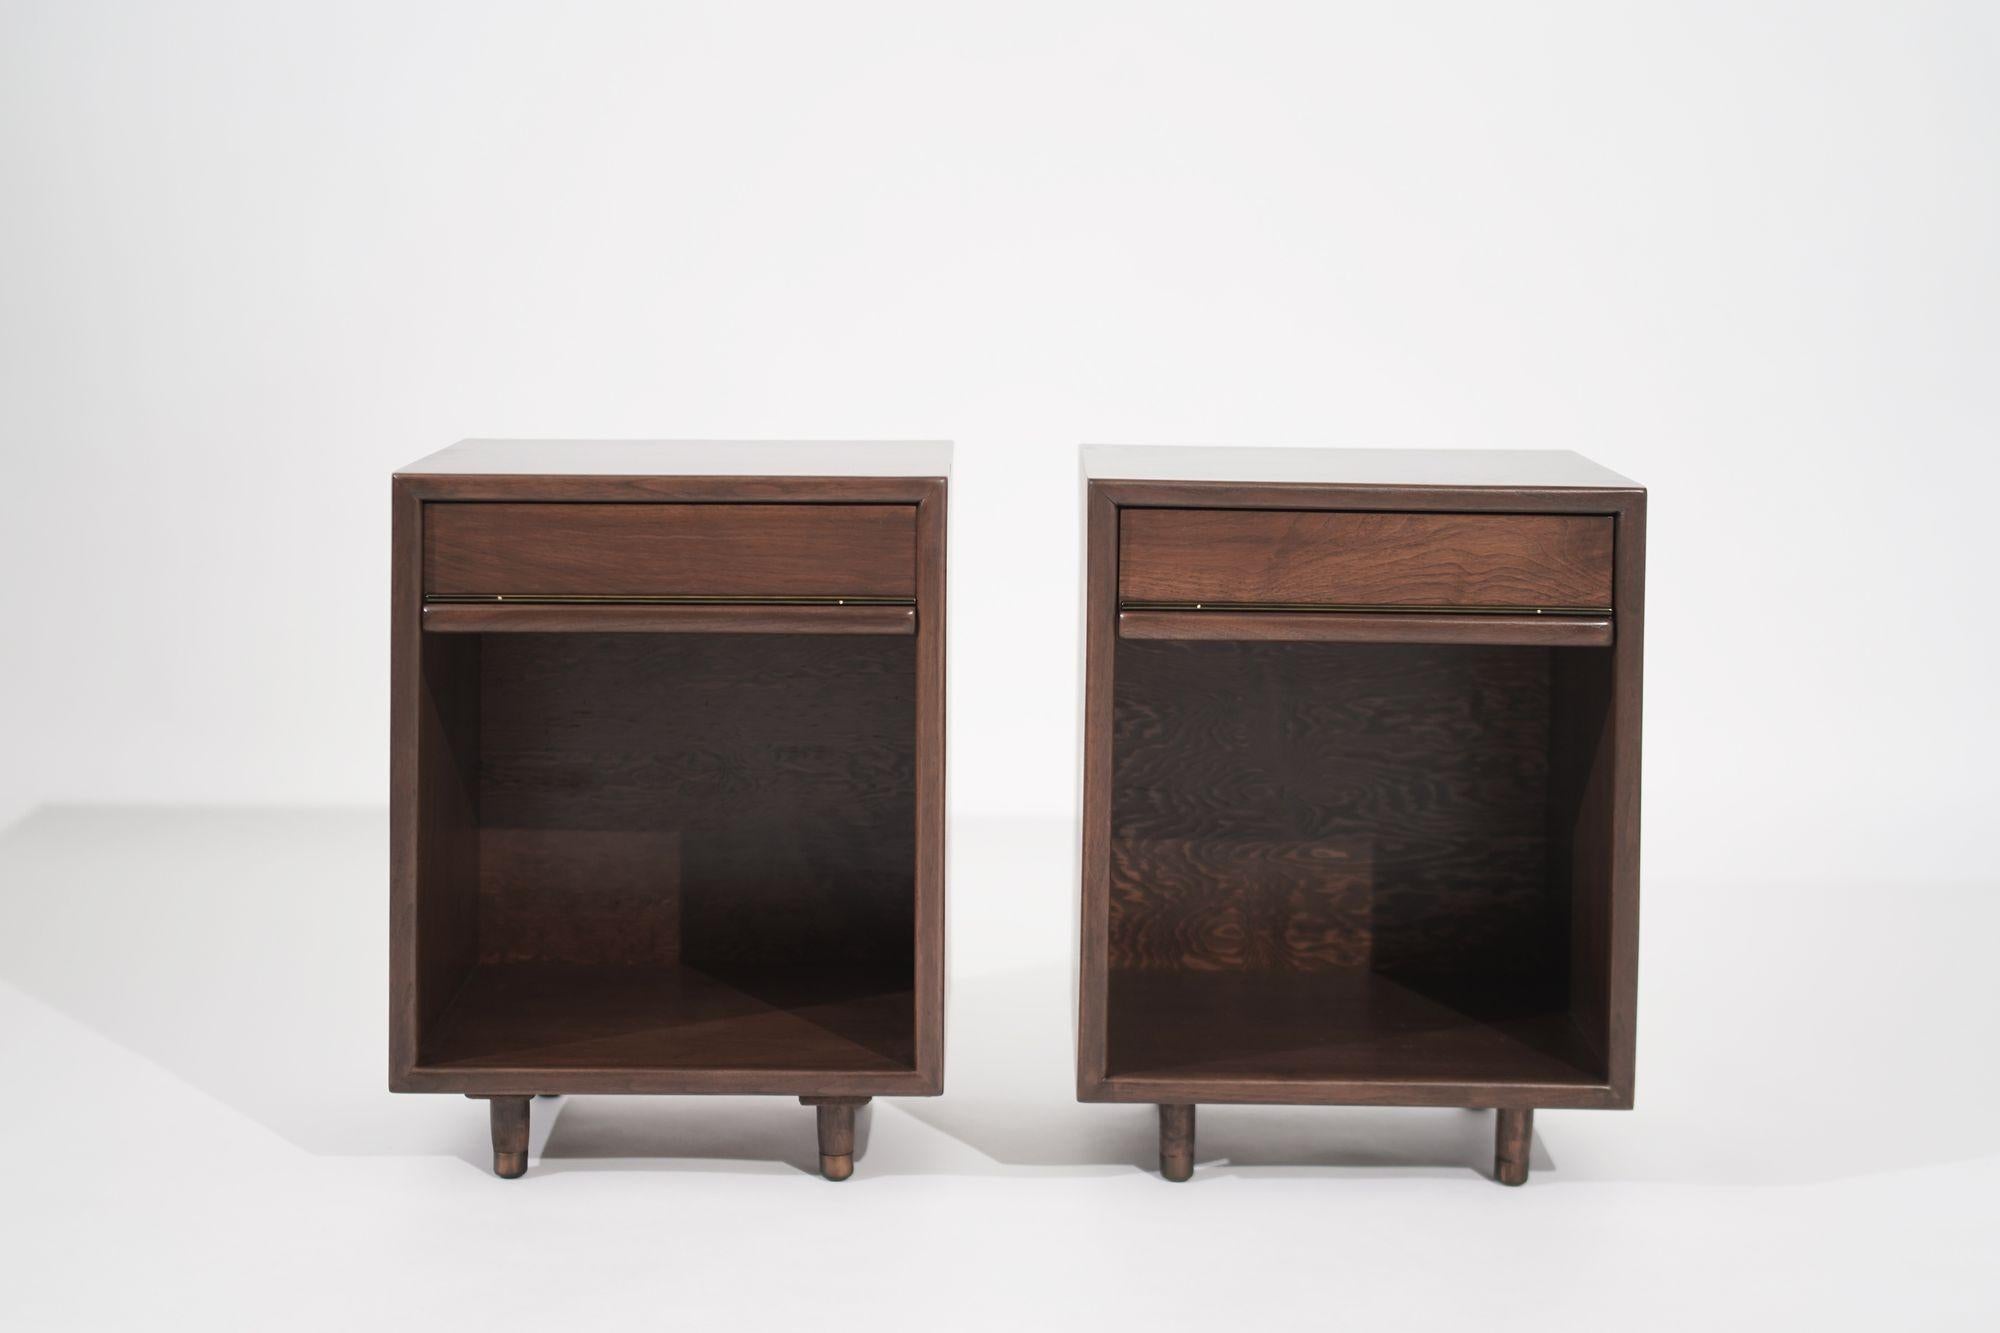 Exceptional pair of minimalist nightstands, expertly crafted in walnut to bring a touch of understated elegance to your bedroom. These nightstands seamlessly blend form and function, combining clean lines and minimalist design with thoughtful